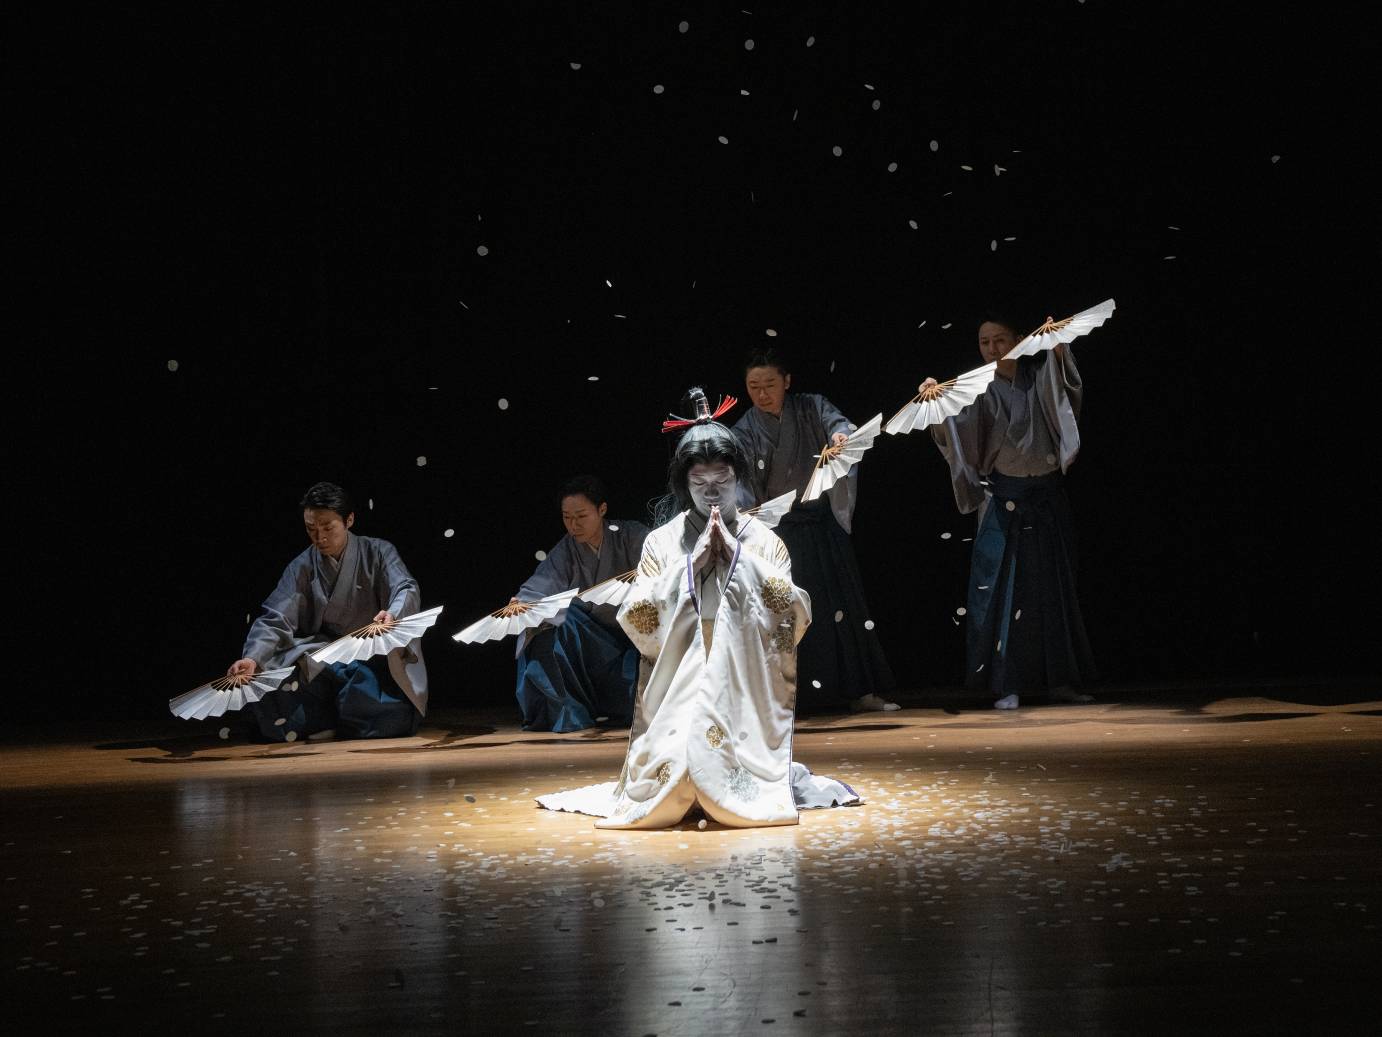 Kyohime, in light-colored sari, full makeup and long black wig, stands centered in front of the four male blue-robed dancers holding a fan in each hand. The fans created a long diagonal from upstage left to downstage right